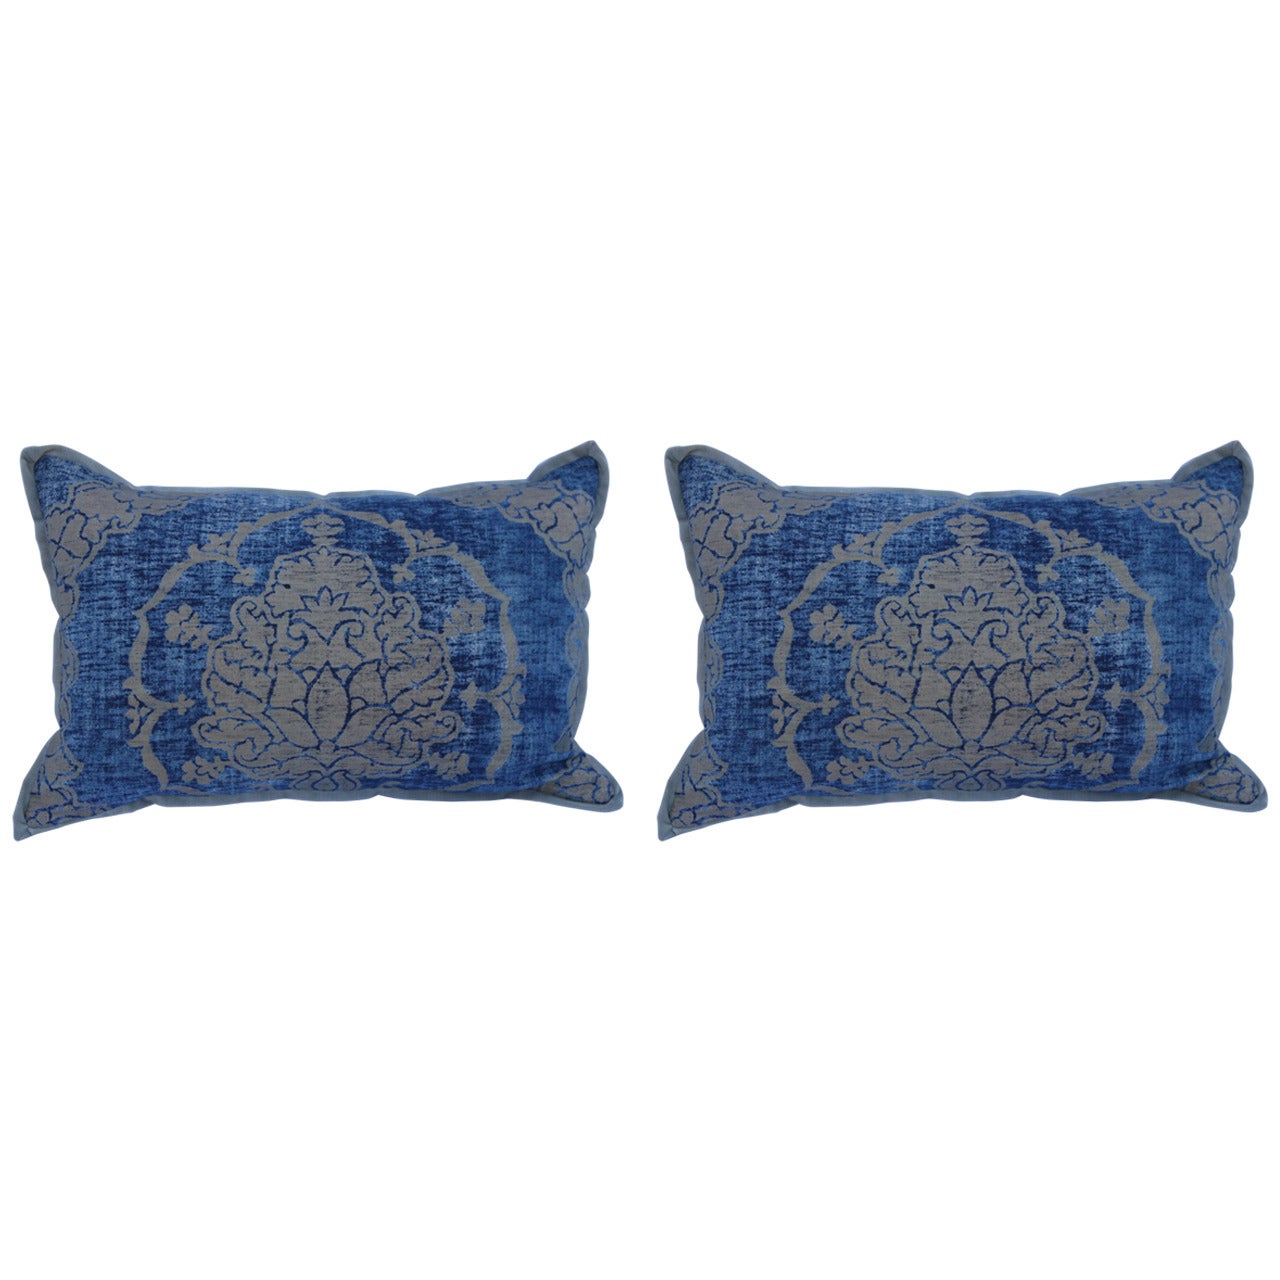 Pair of Vintage Italian Fortuny Pillows